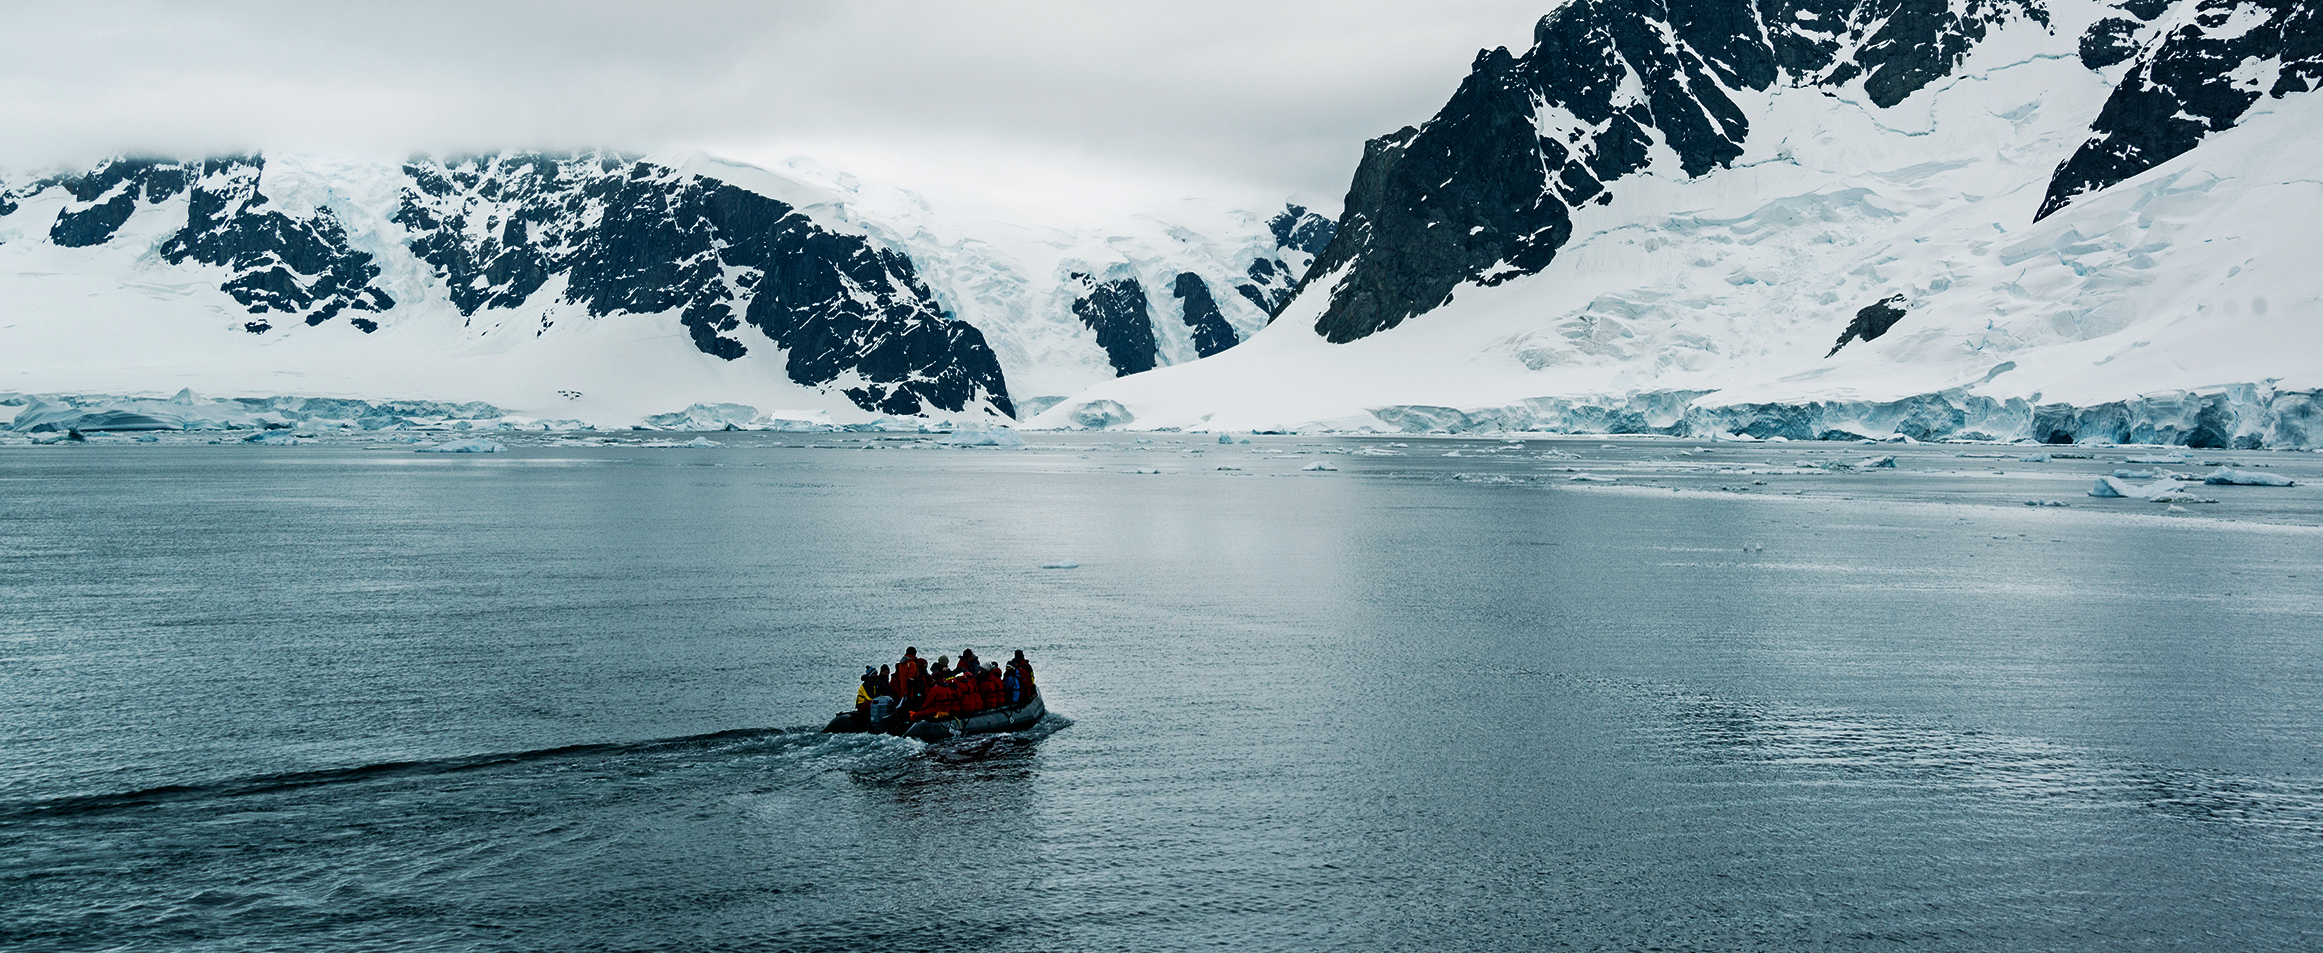 Antarctica mentioned as an expensive destination to insure by travel insurance company